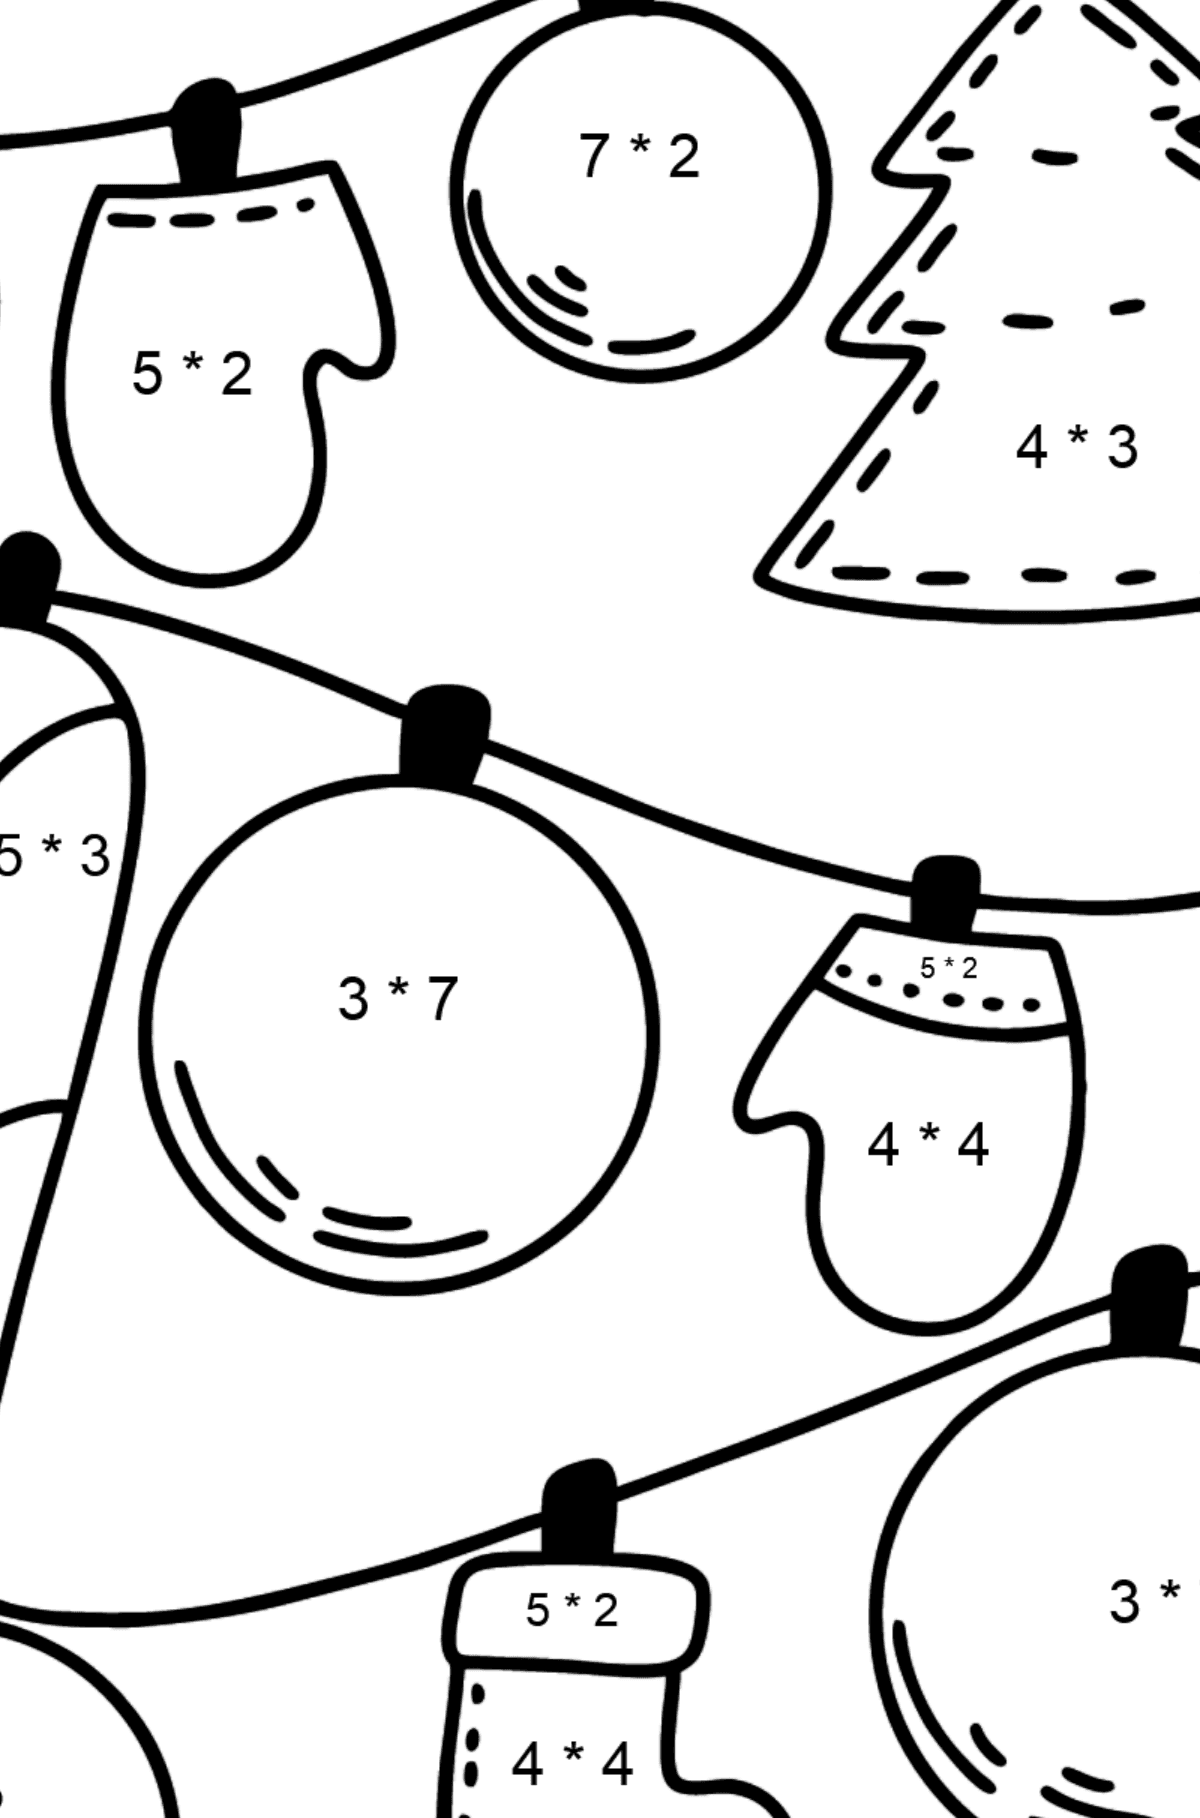 Christmas garland coloring page - Math Coloring - Multiplication for Kids